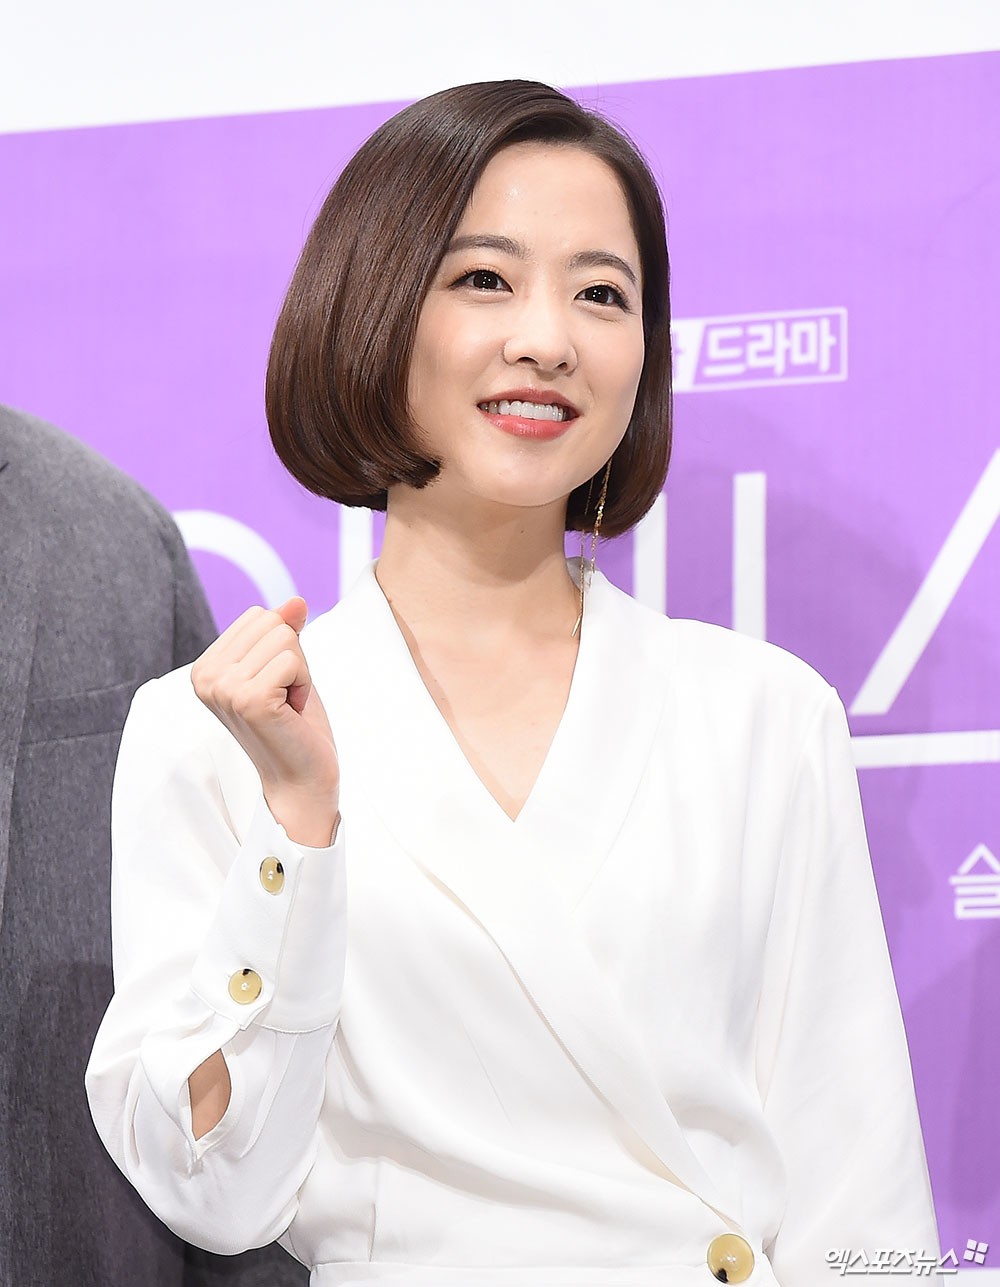 Actor Park Bo-young, who attended the TVN New Moon drama Abyss production presentation held at Imperial Palace Hotel in Nonhyeon-dong, Seoul on the afternoon of the 3rd, is posing.